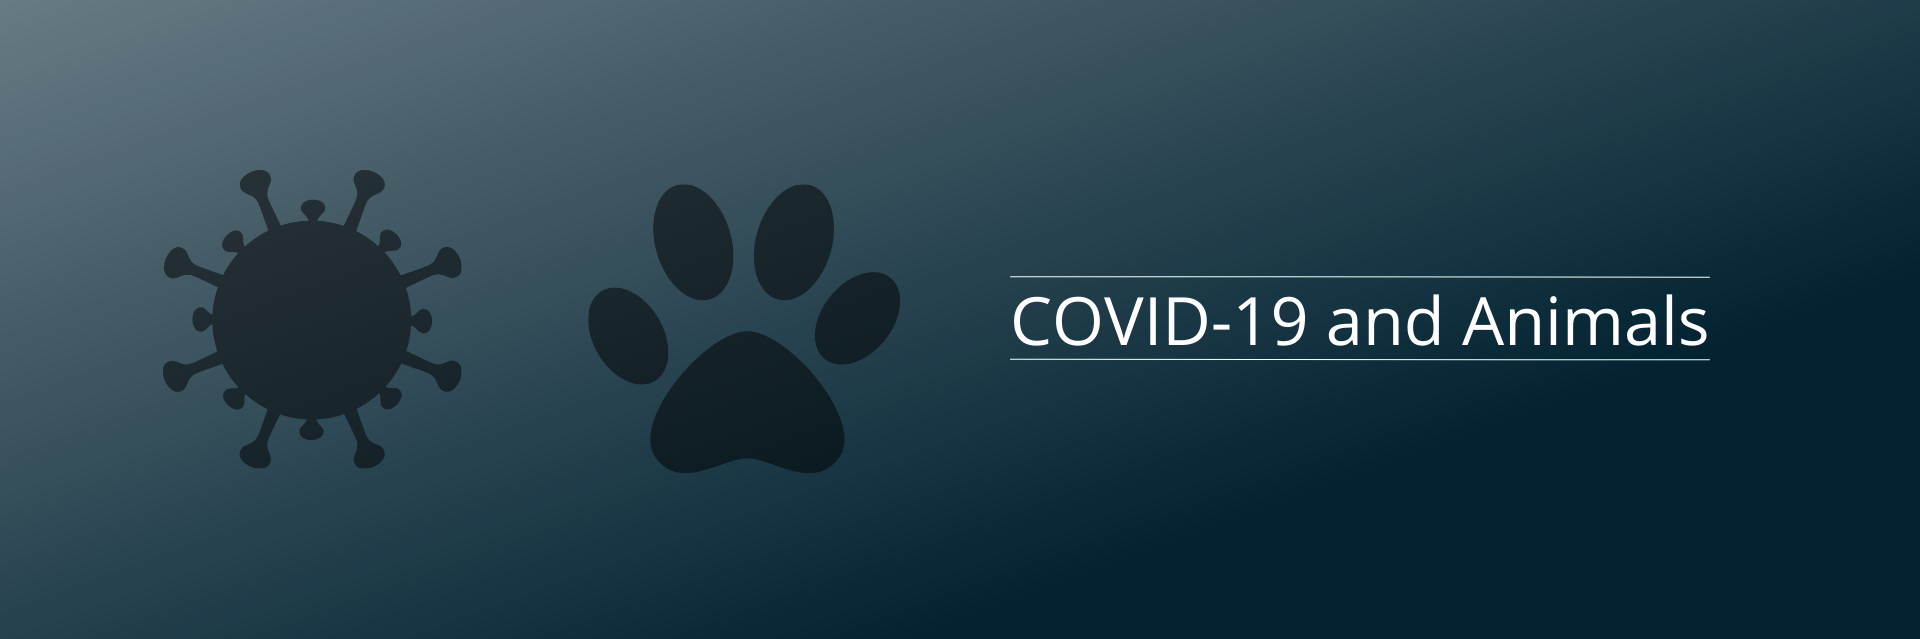 COVID and Animals banner image, black outline of virus particle, black outline of paw print, white text reading COVID and animals, on dark blue gradient background